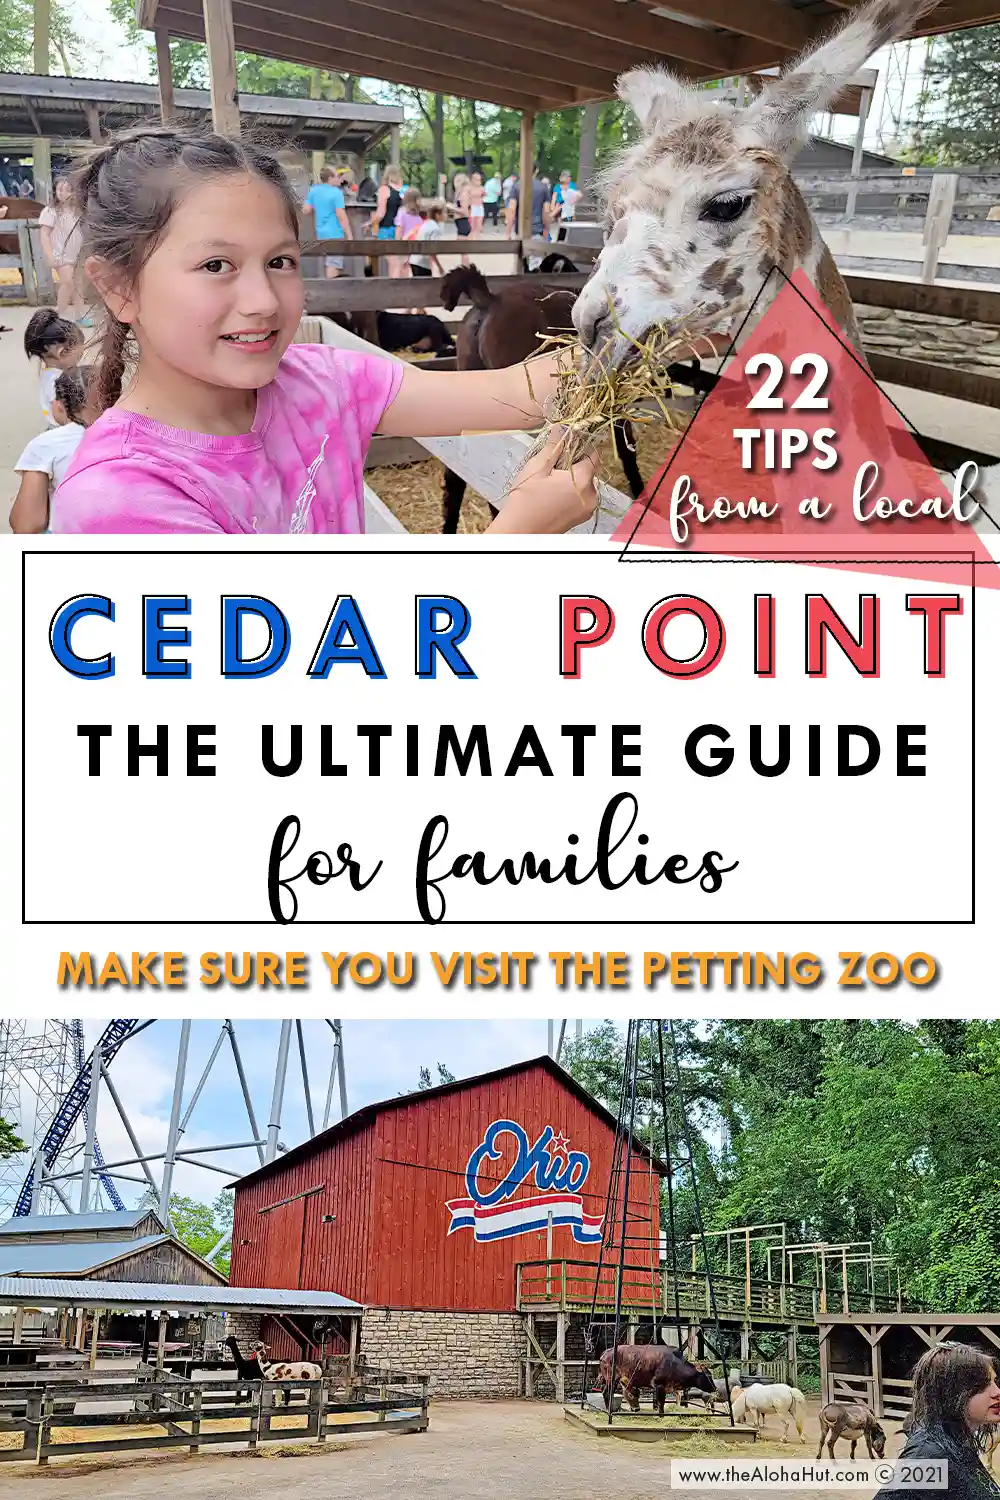 Cedar Point the Ultimate Guide for Families - Tips & Tricks - Petting Zoo